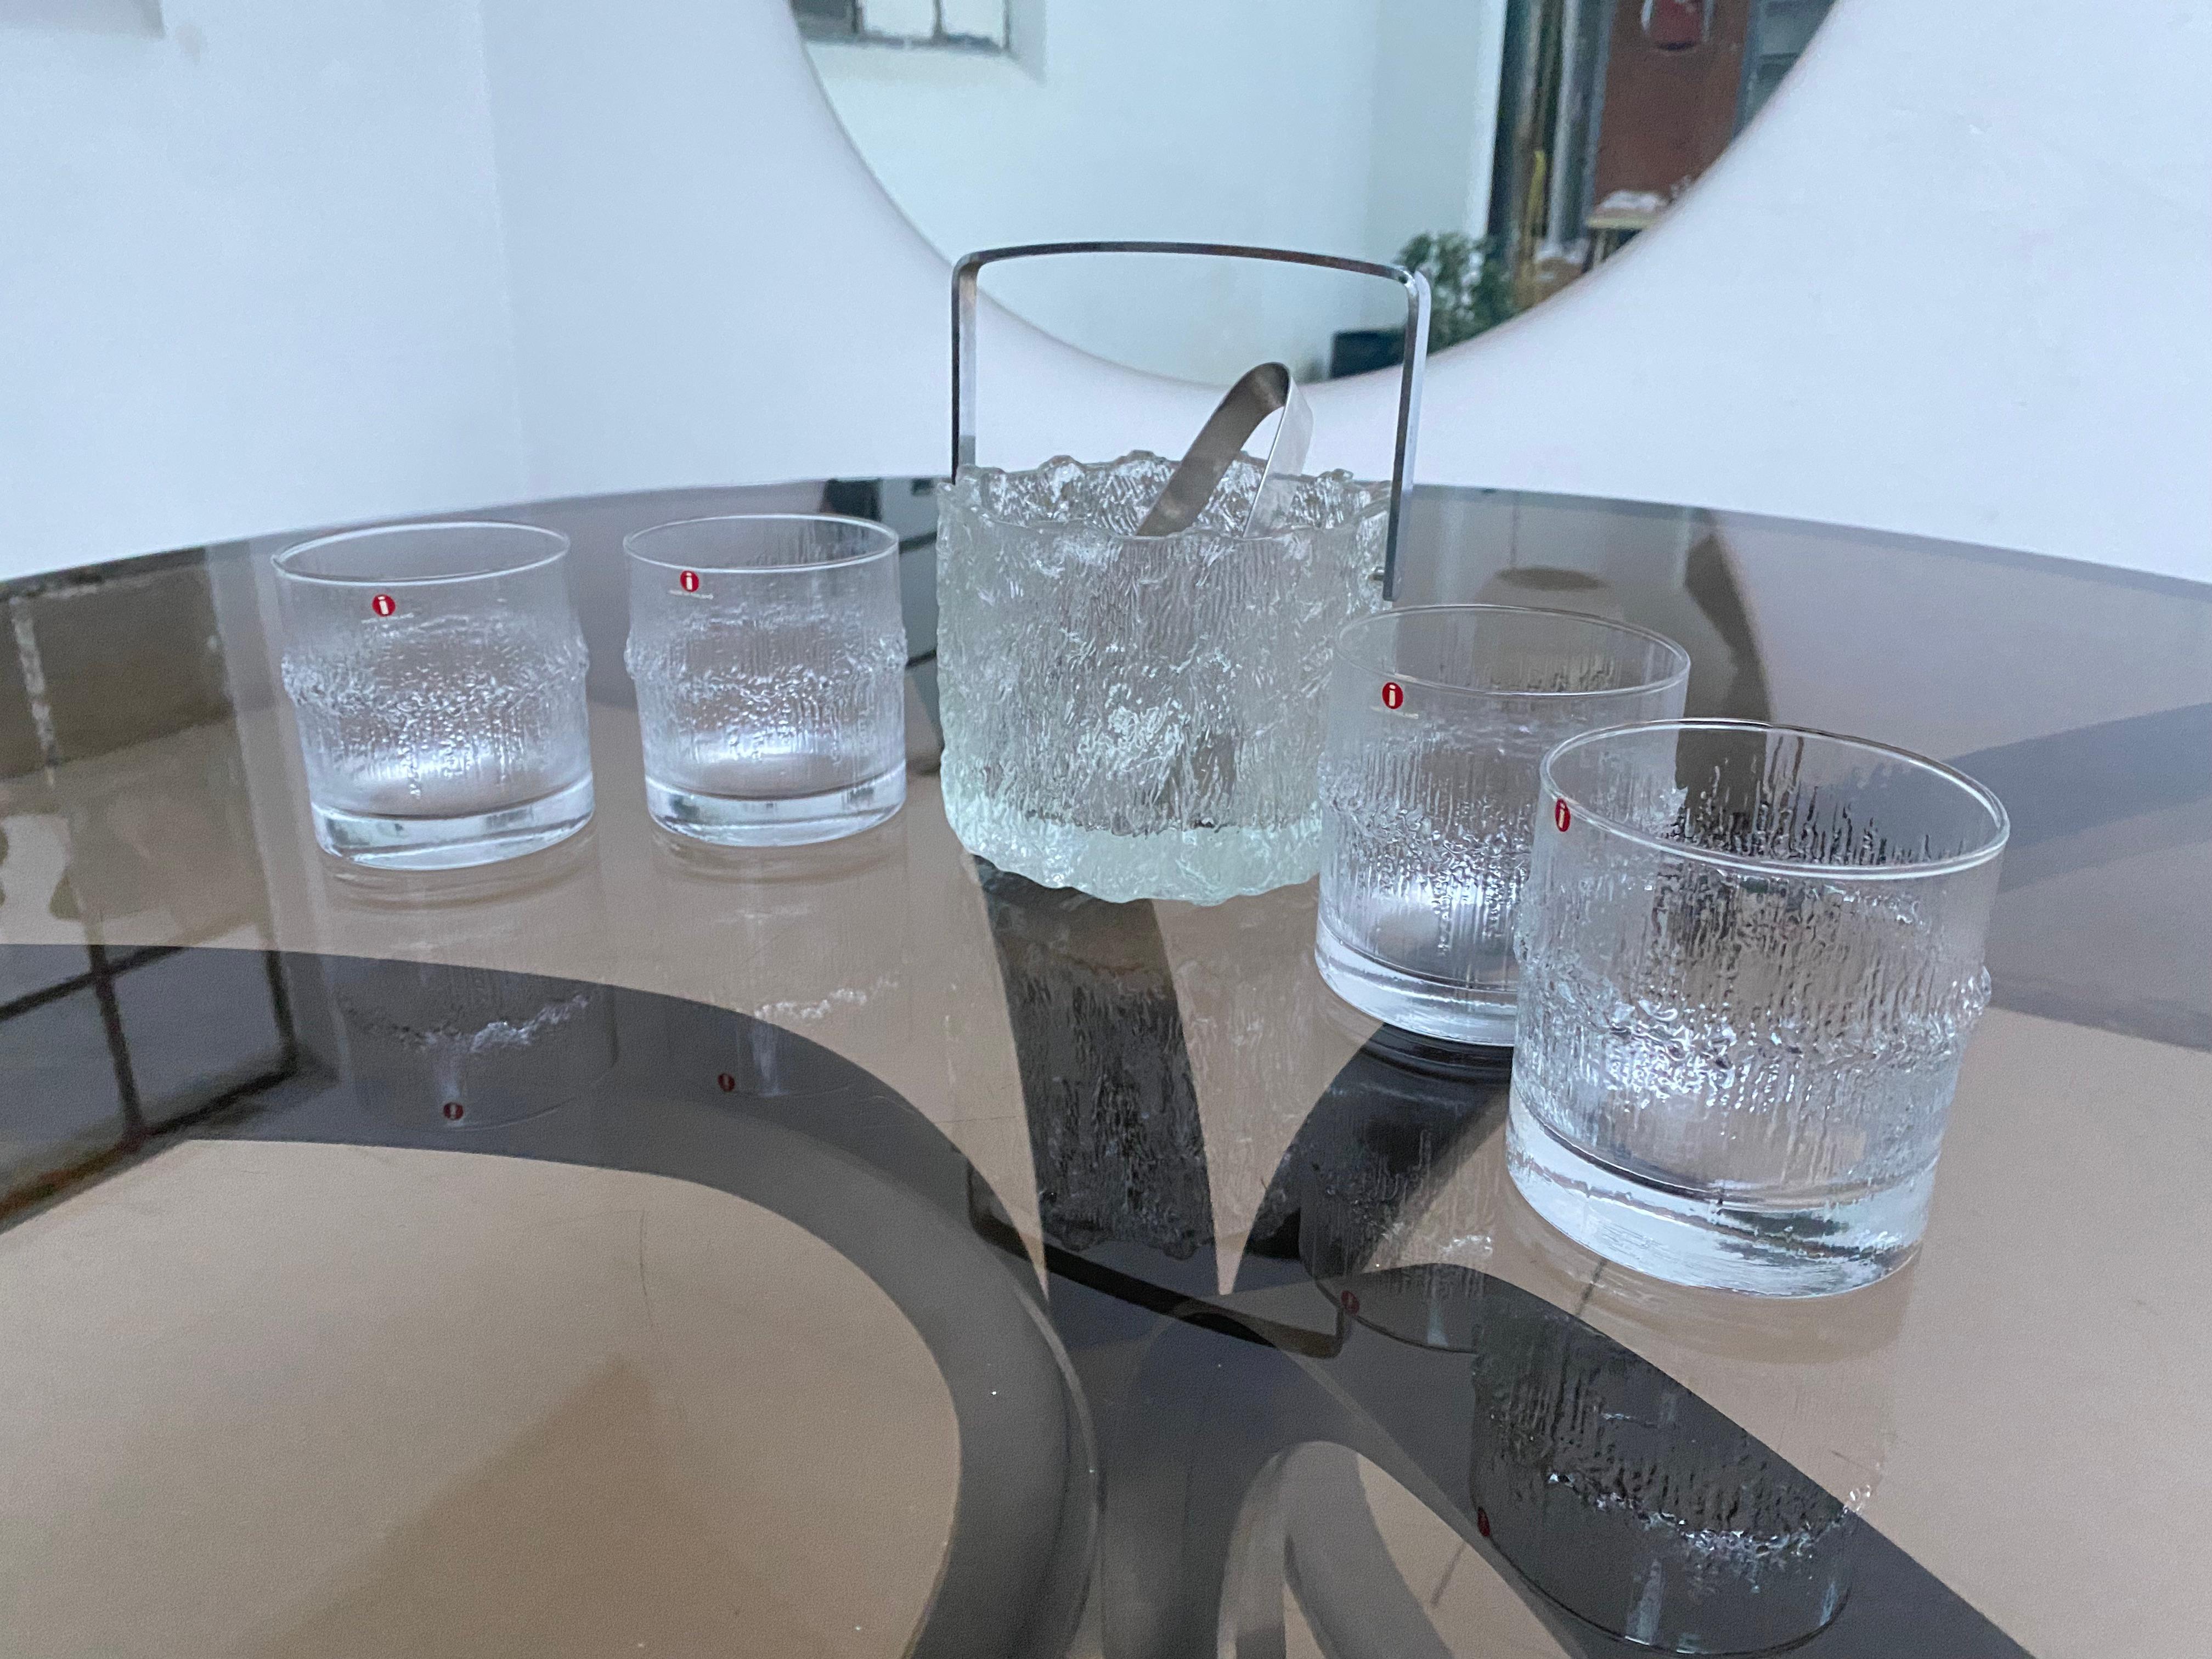 Set of 4 'new' old stock Whiskey 'Niva' Series glasses in original box by Iittalia Finland and a matching 'Seita' ice bucket 

The perfect gift set for your husband or to impress your friends

Free Shipping!

Niva glassware
Multitalented designer